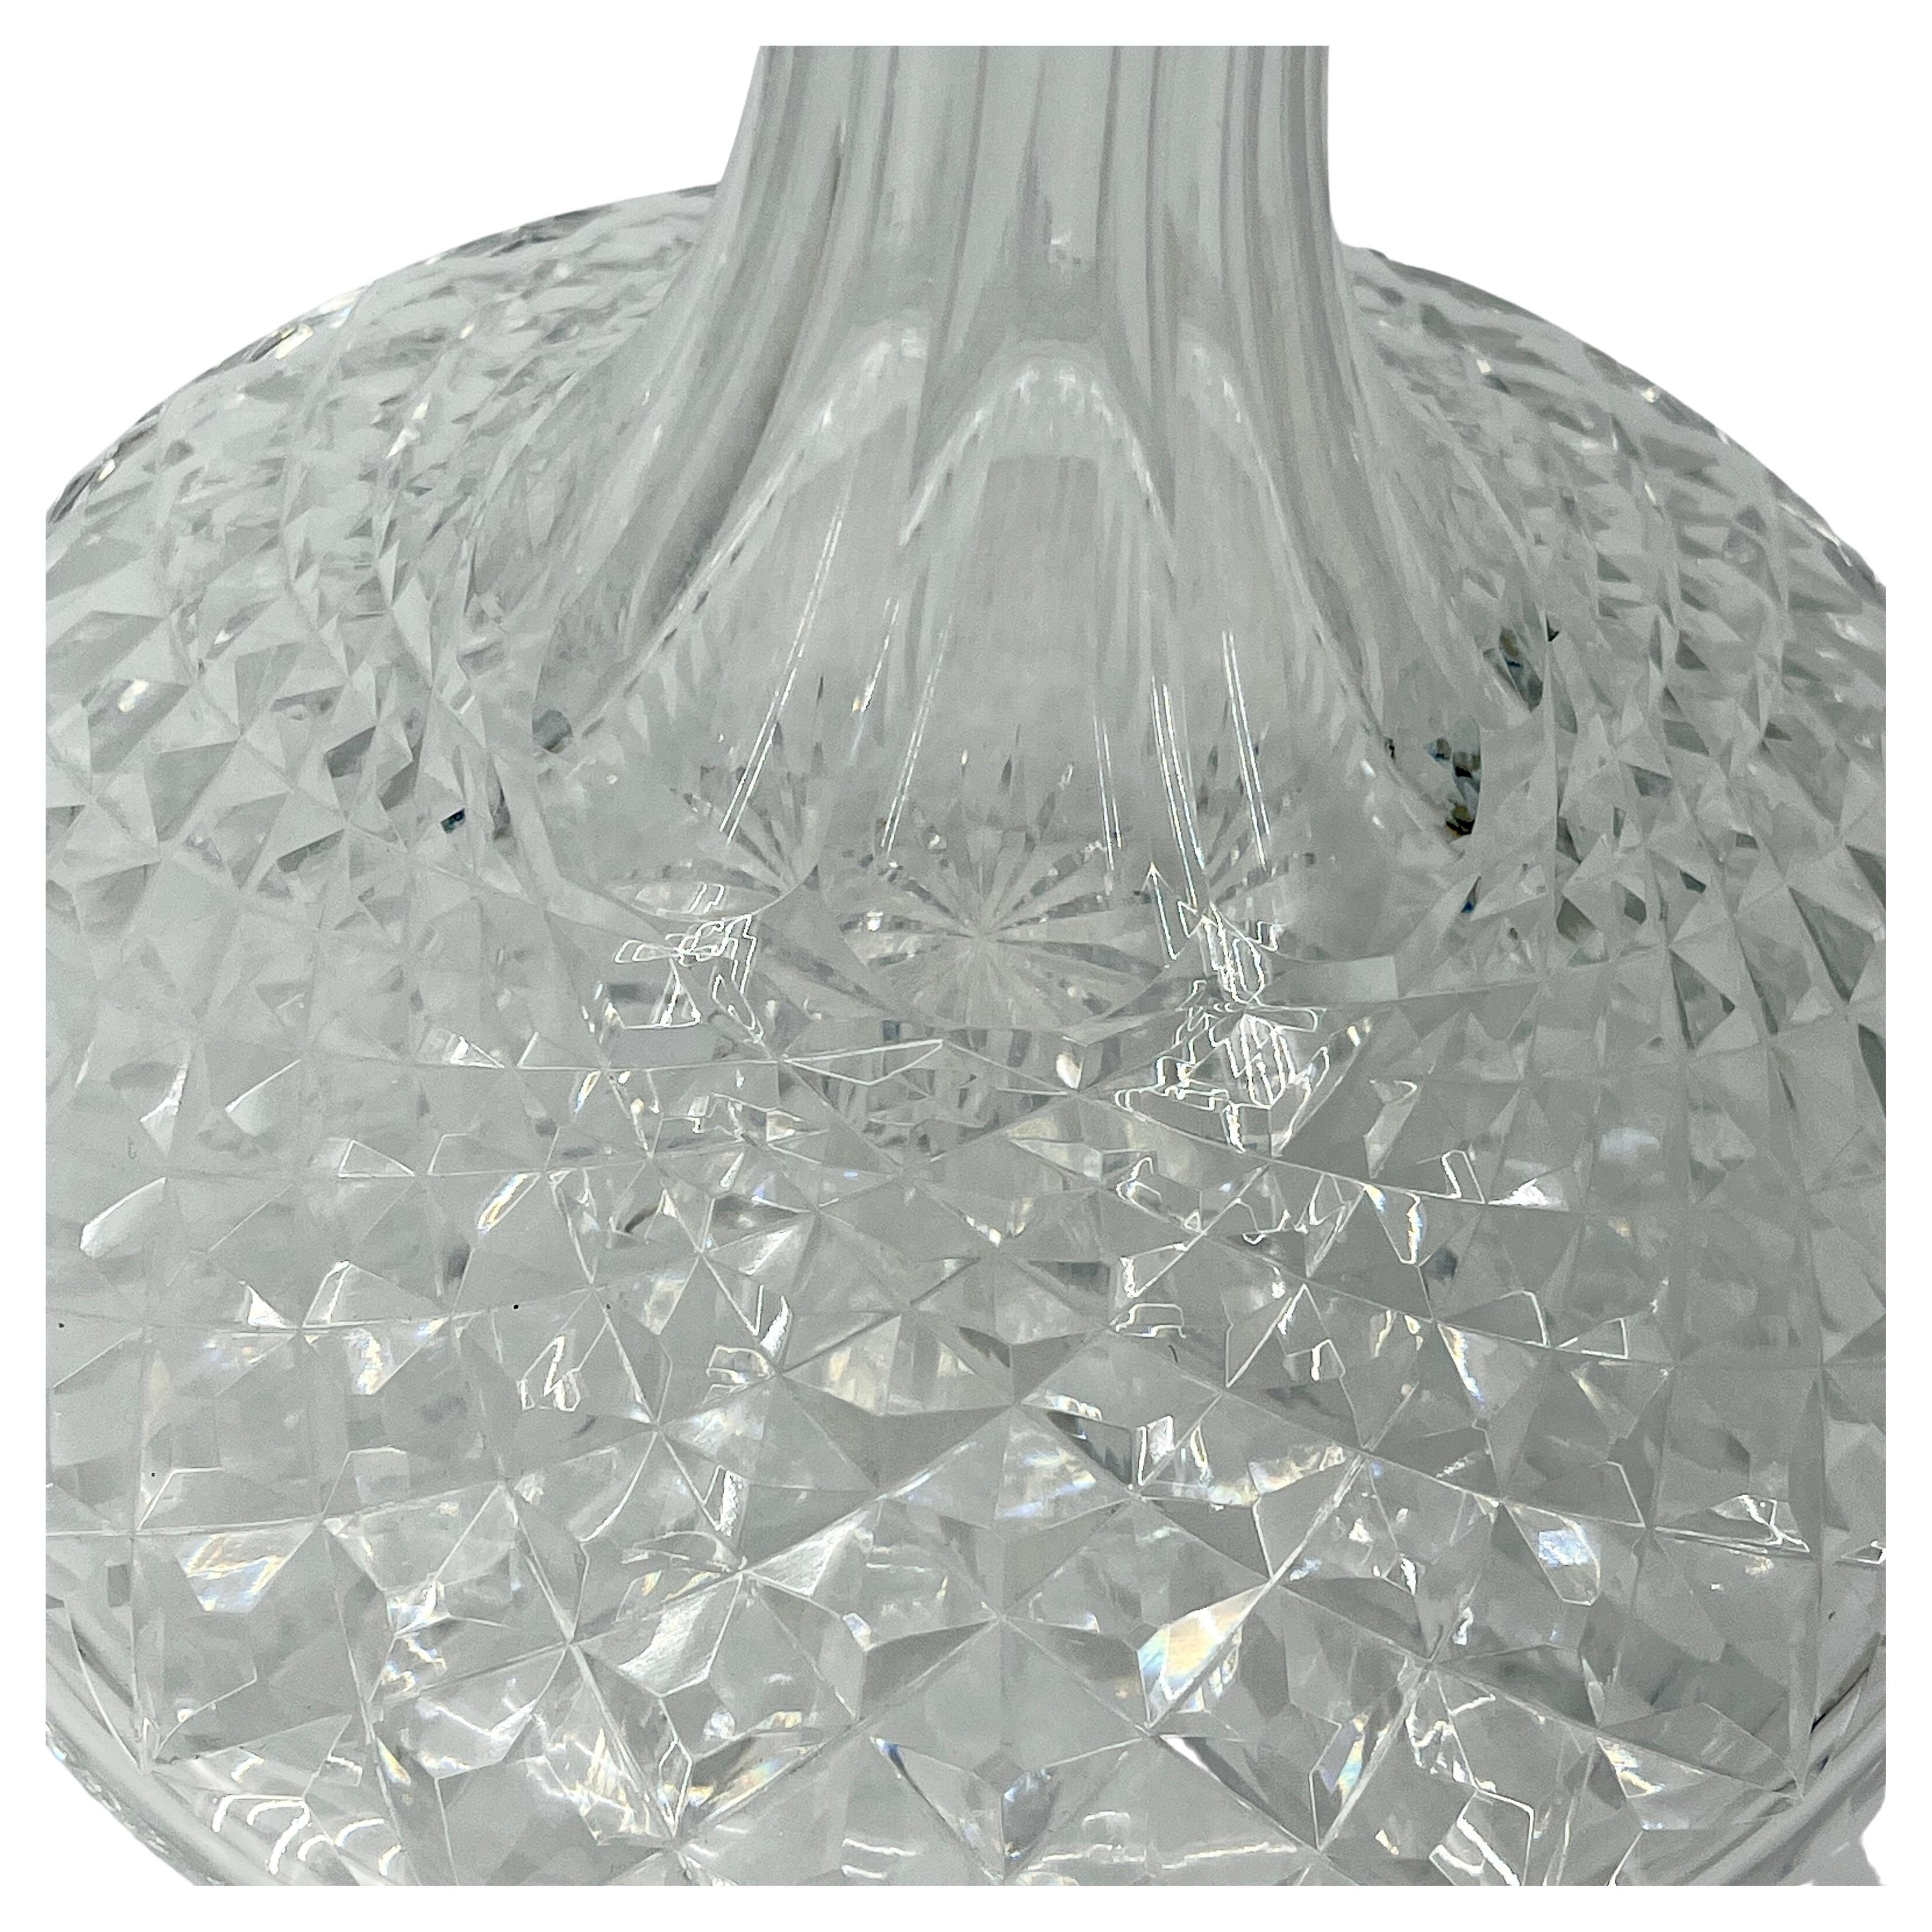 Early 20th Century Cut Crystal Decanter 3